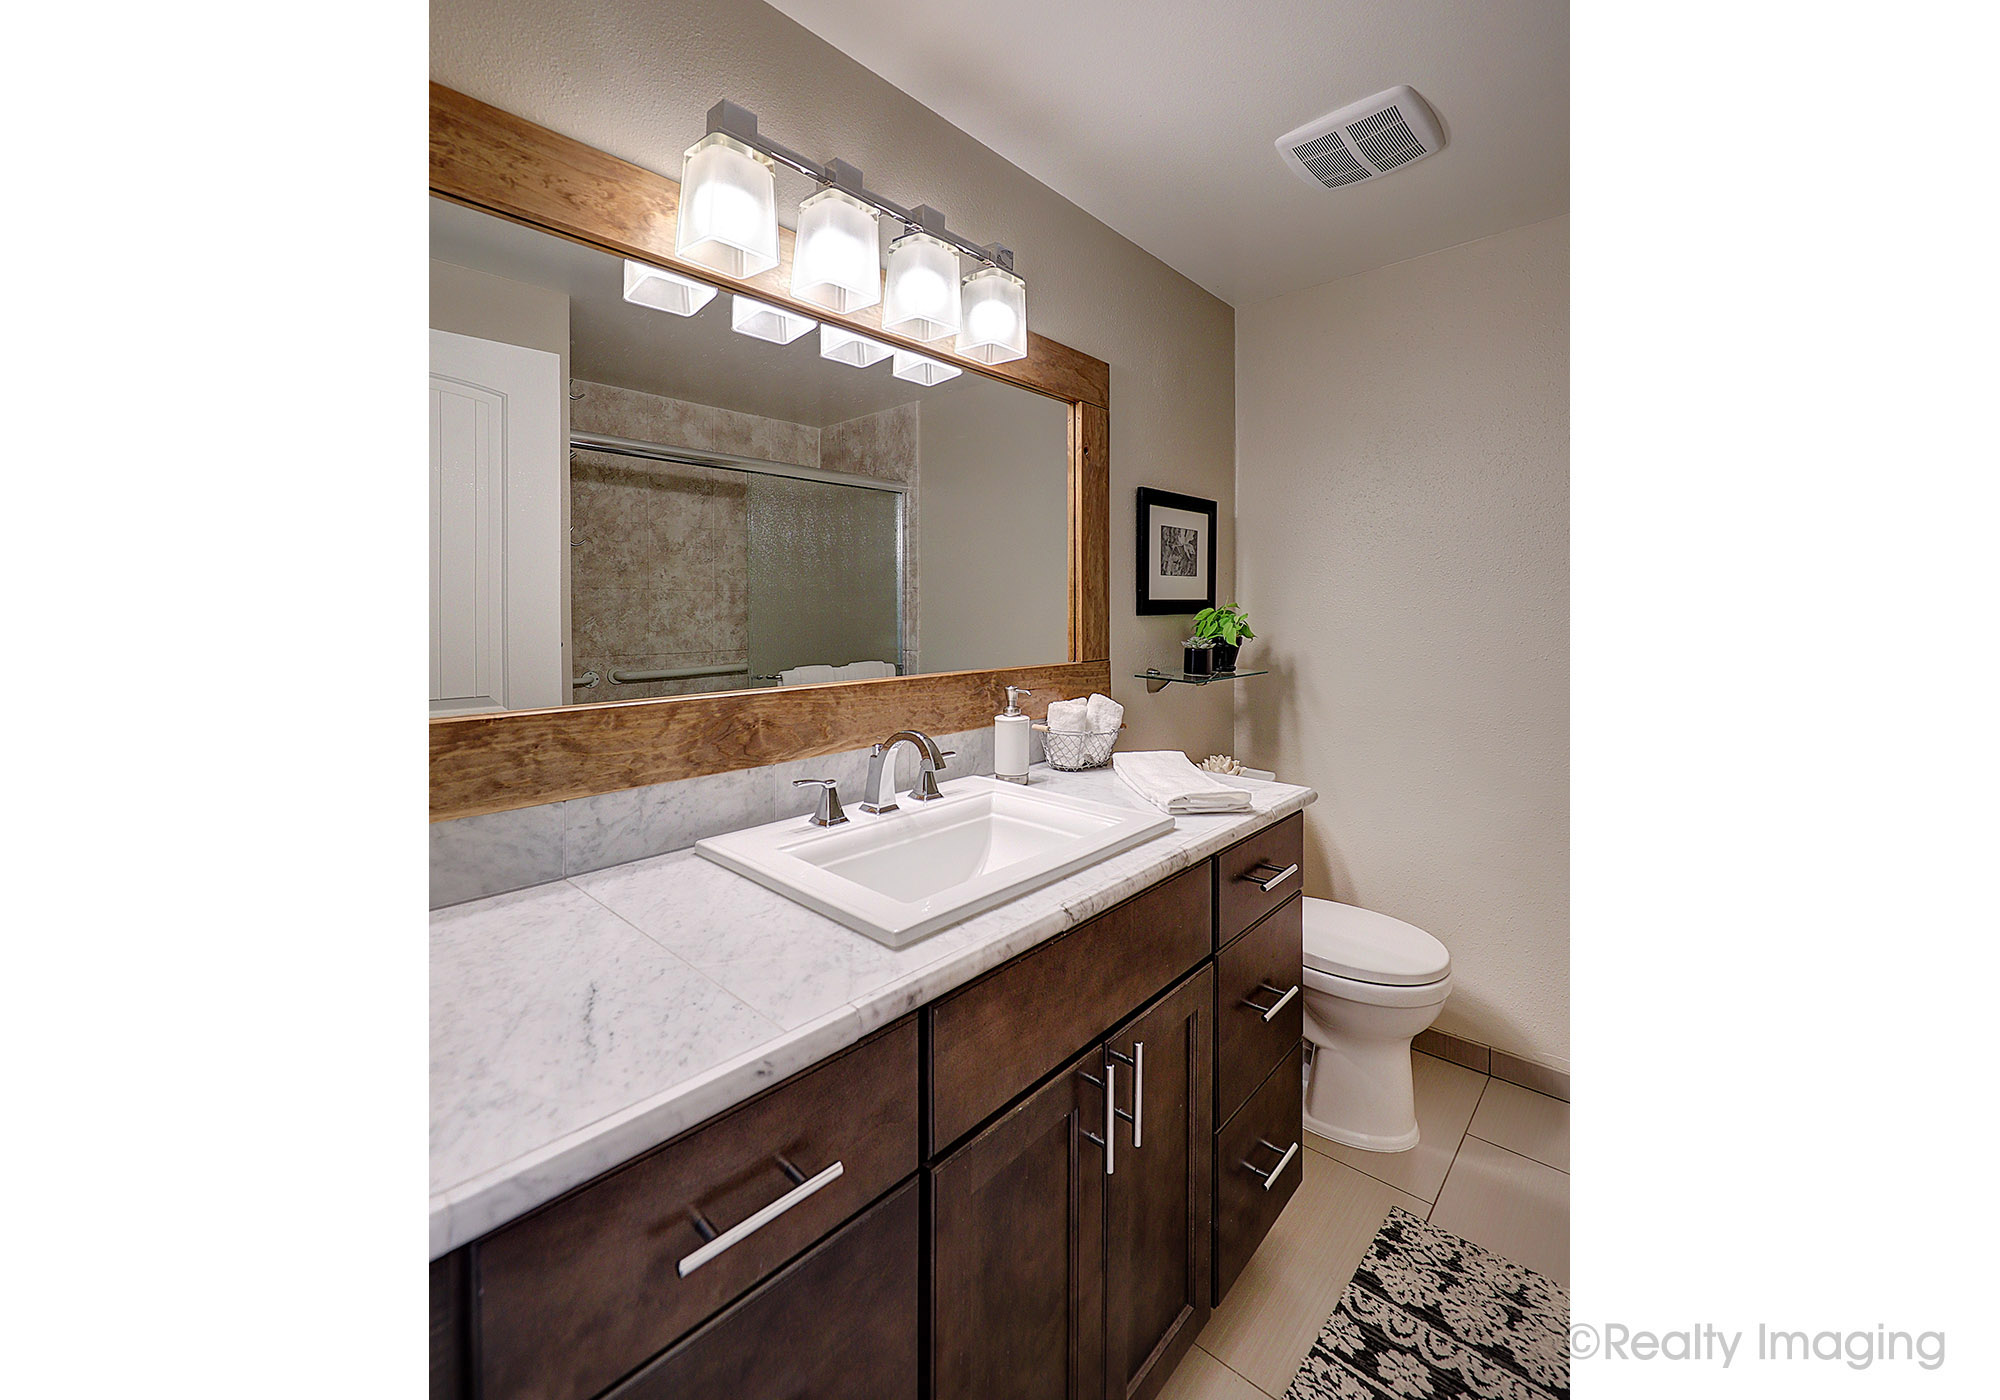 Image for 11545 SW Majestic Ln., #6, King City, Oregon 97224